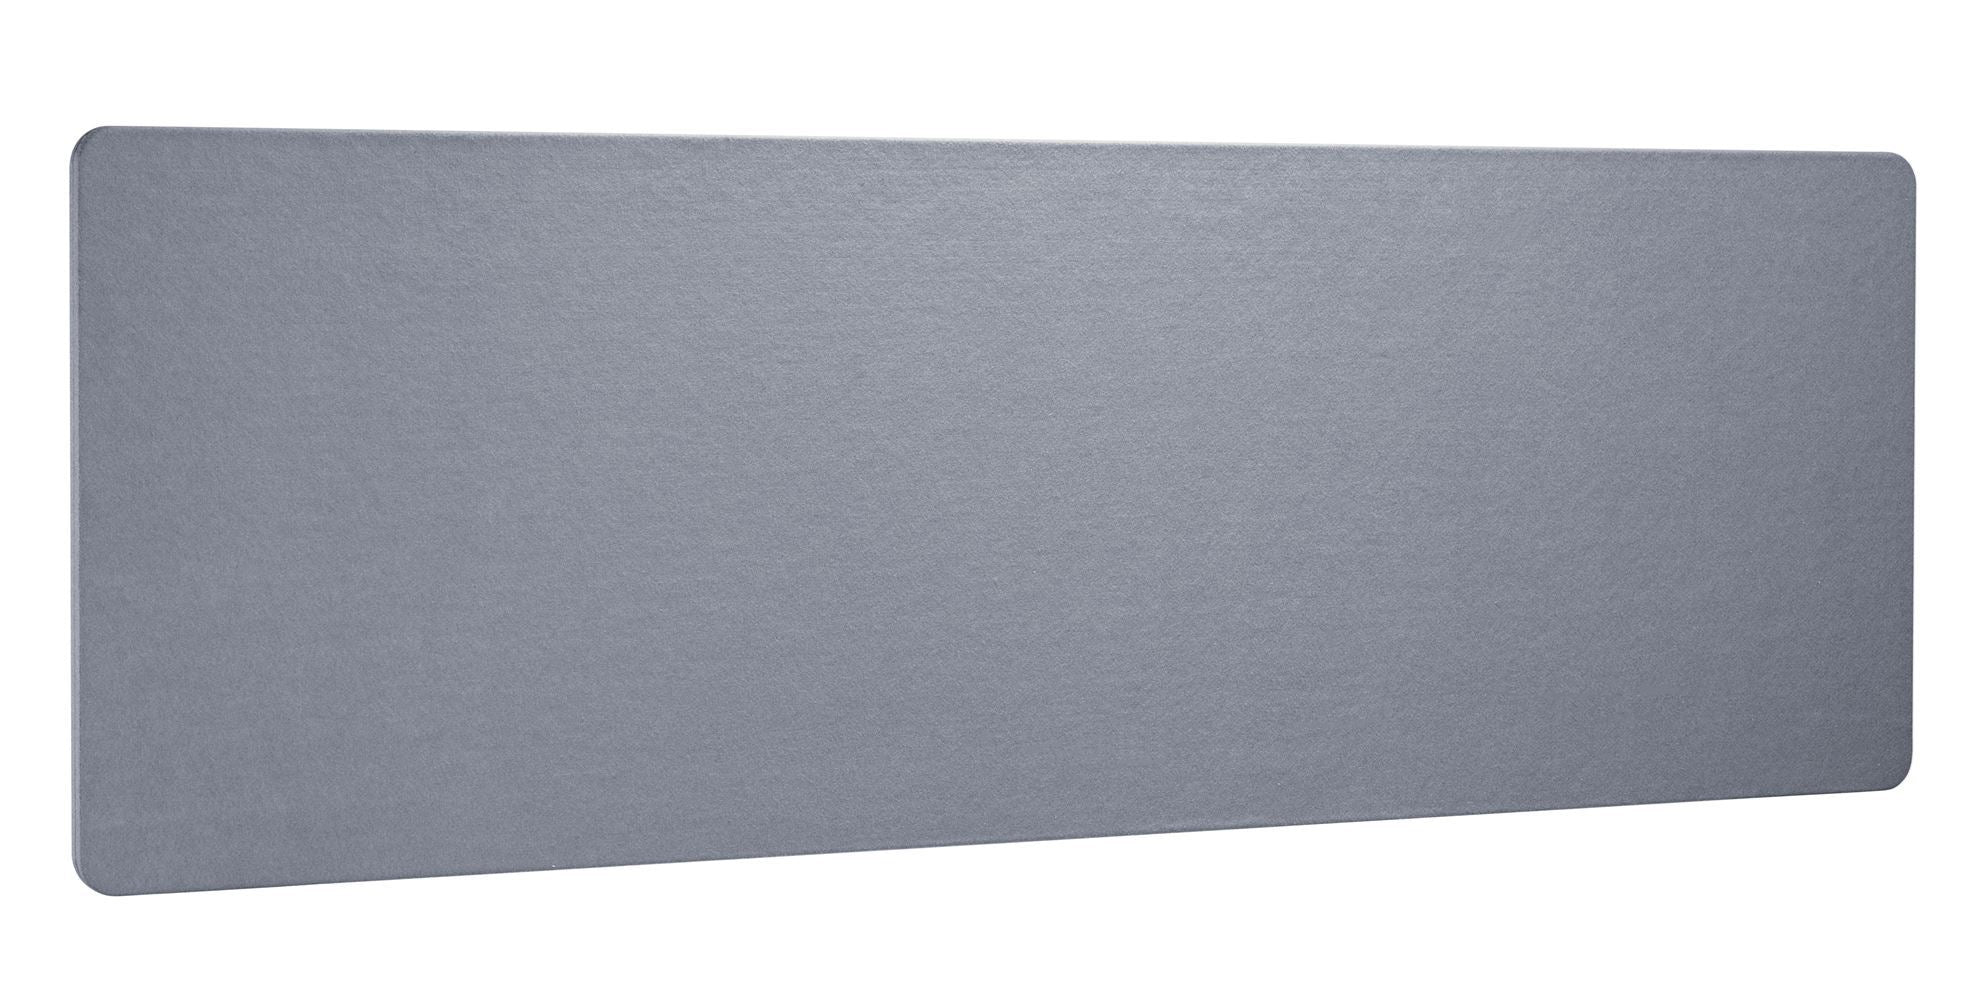 BRATECK_1.8m_Desktop_Privacy_Panel_with_2x_Heavy-Duty_Clamp._Felt_Surface_to_Reduce_Office_Noise._Screen_Dims_1800x600x20mm._Grey_Colour._Pair_with_TP18075_or_TP18075L